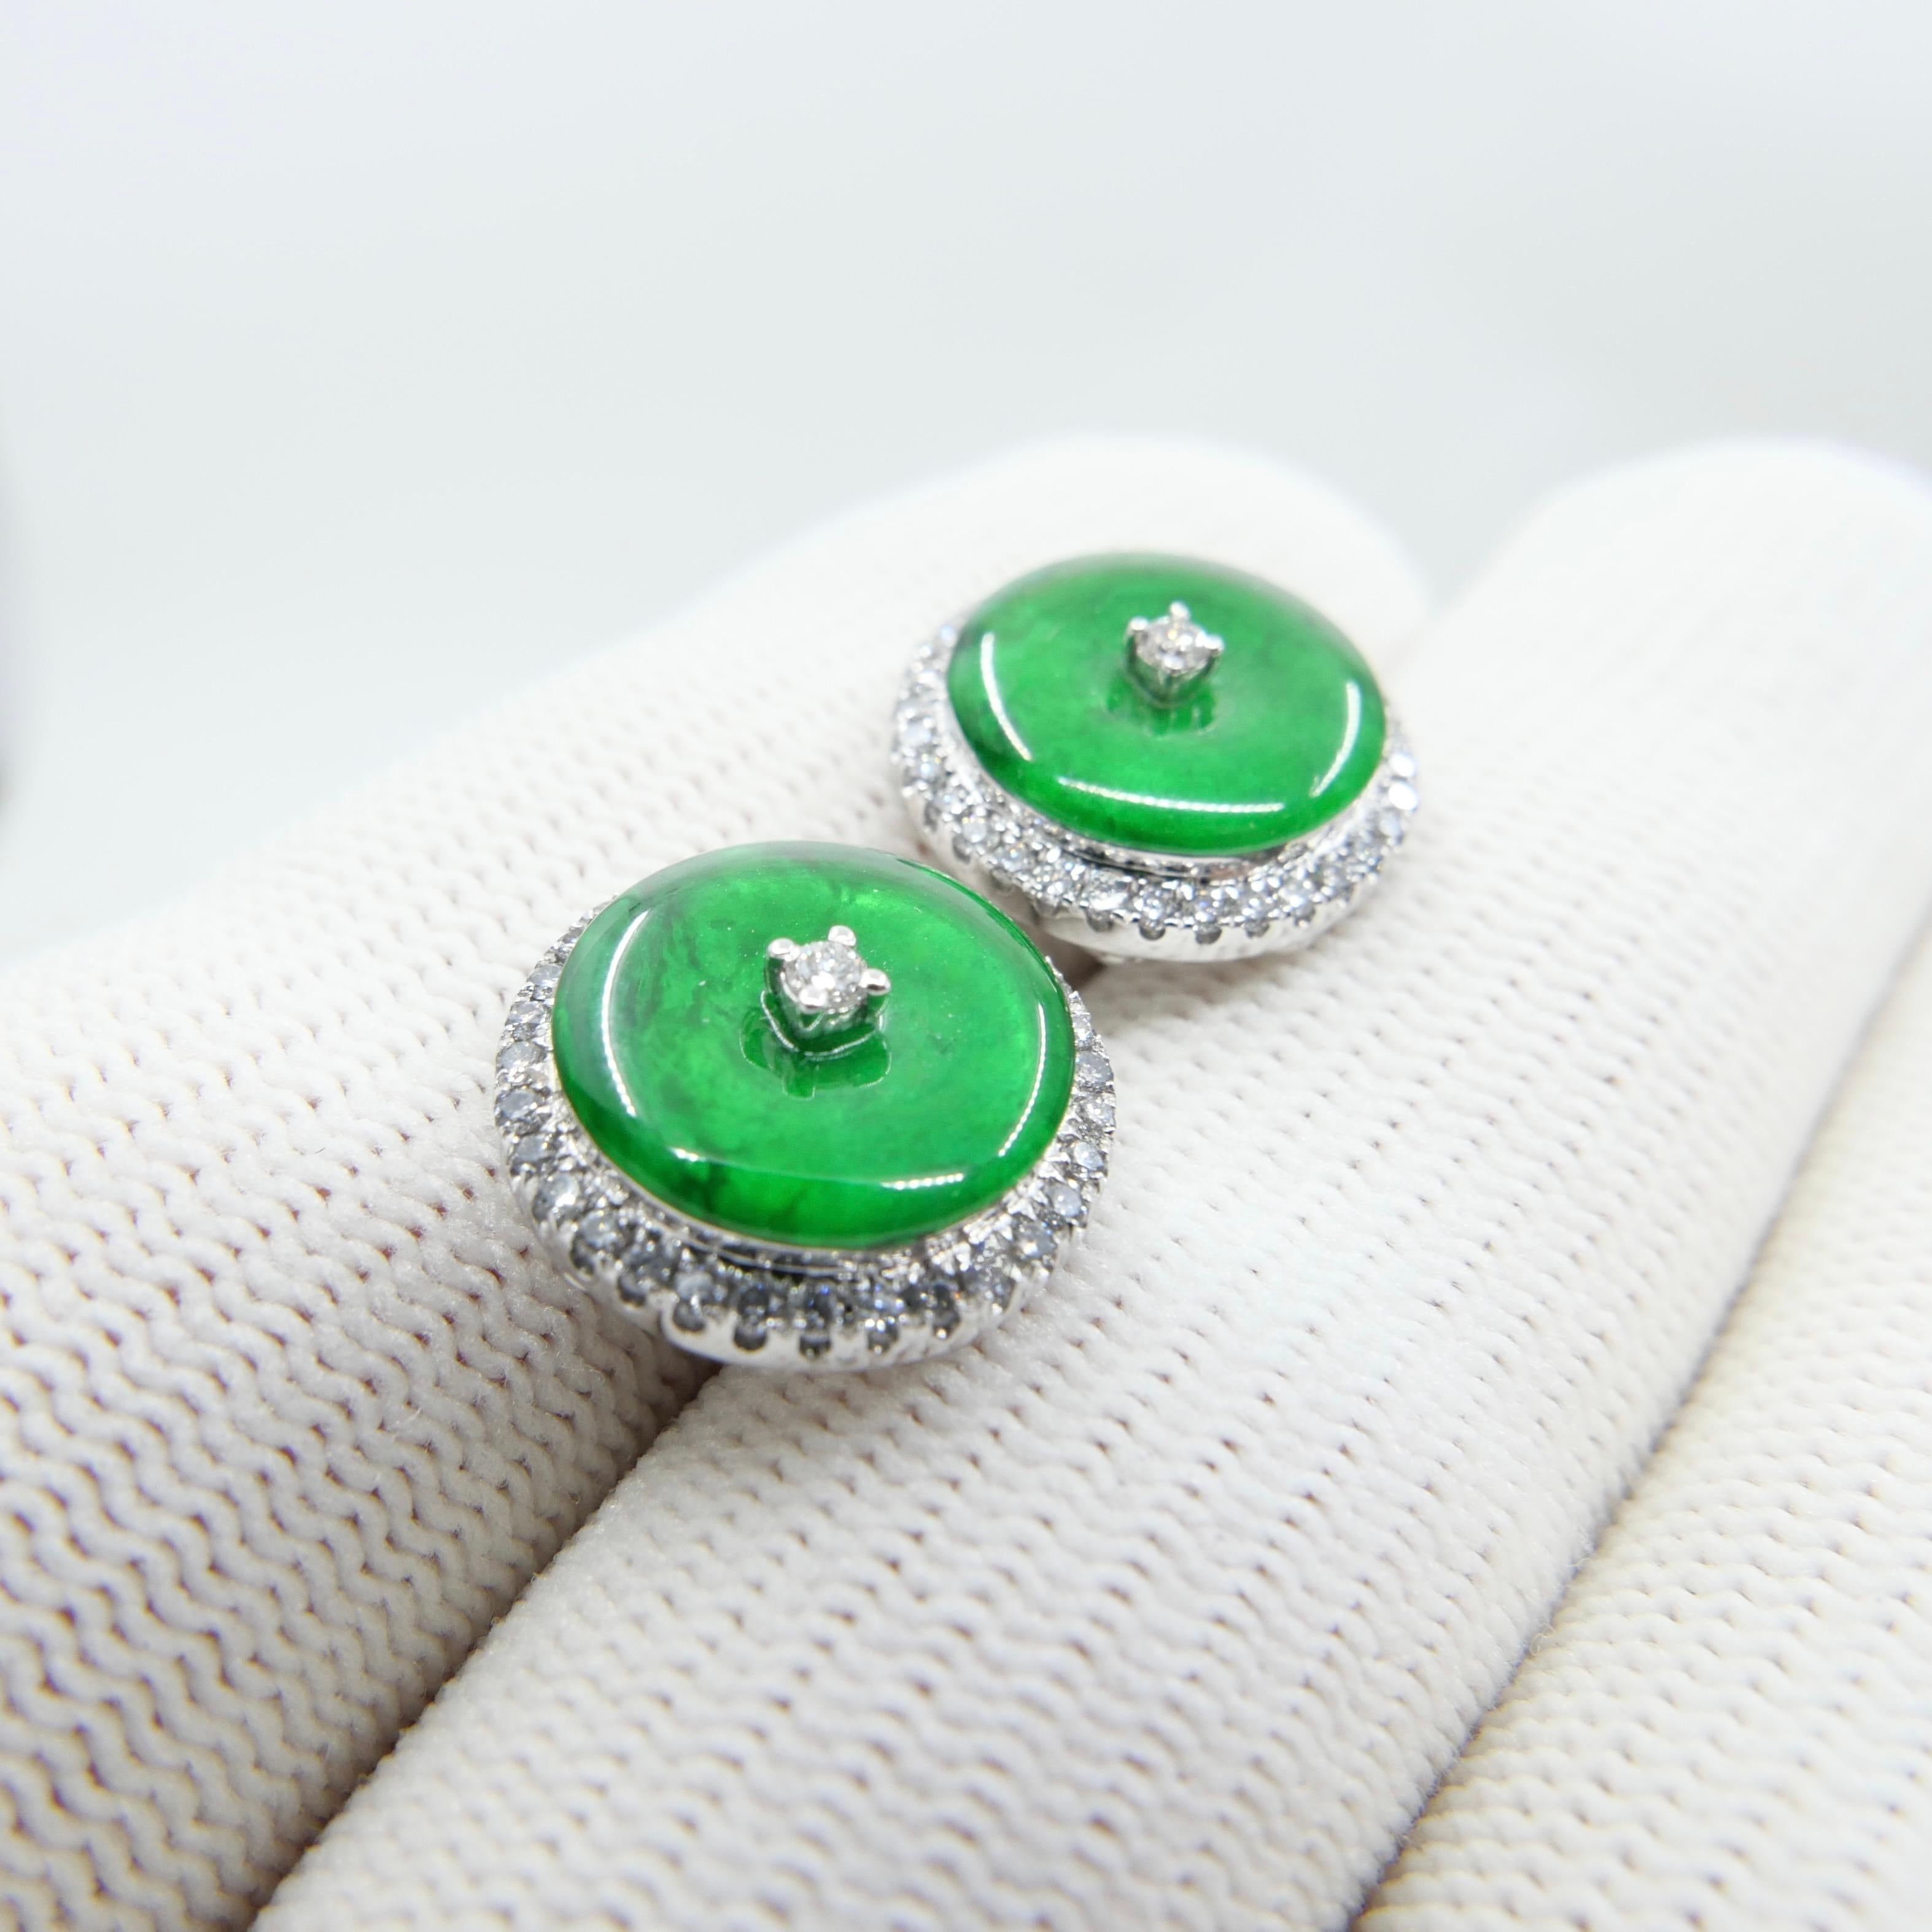 Certified Natural Type A Jadeite Jade And Diamond Earrings. Apple Green Color 1